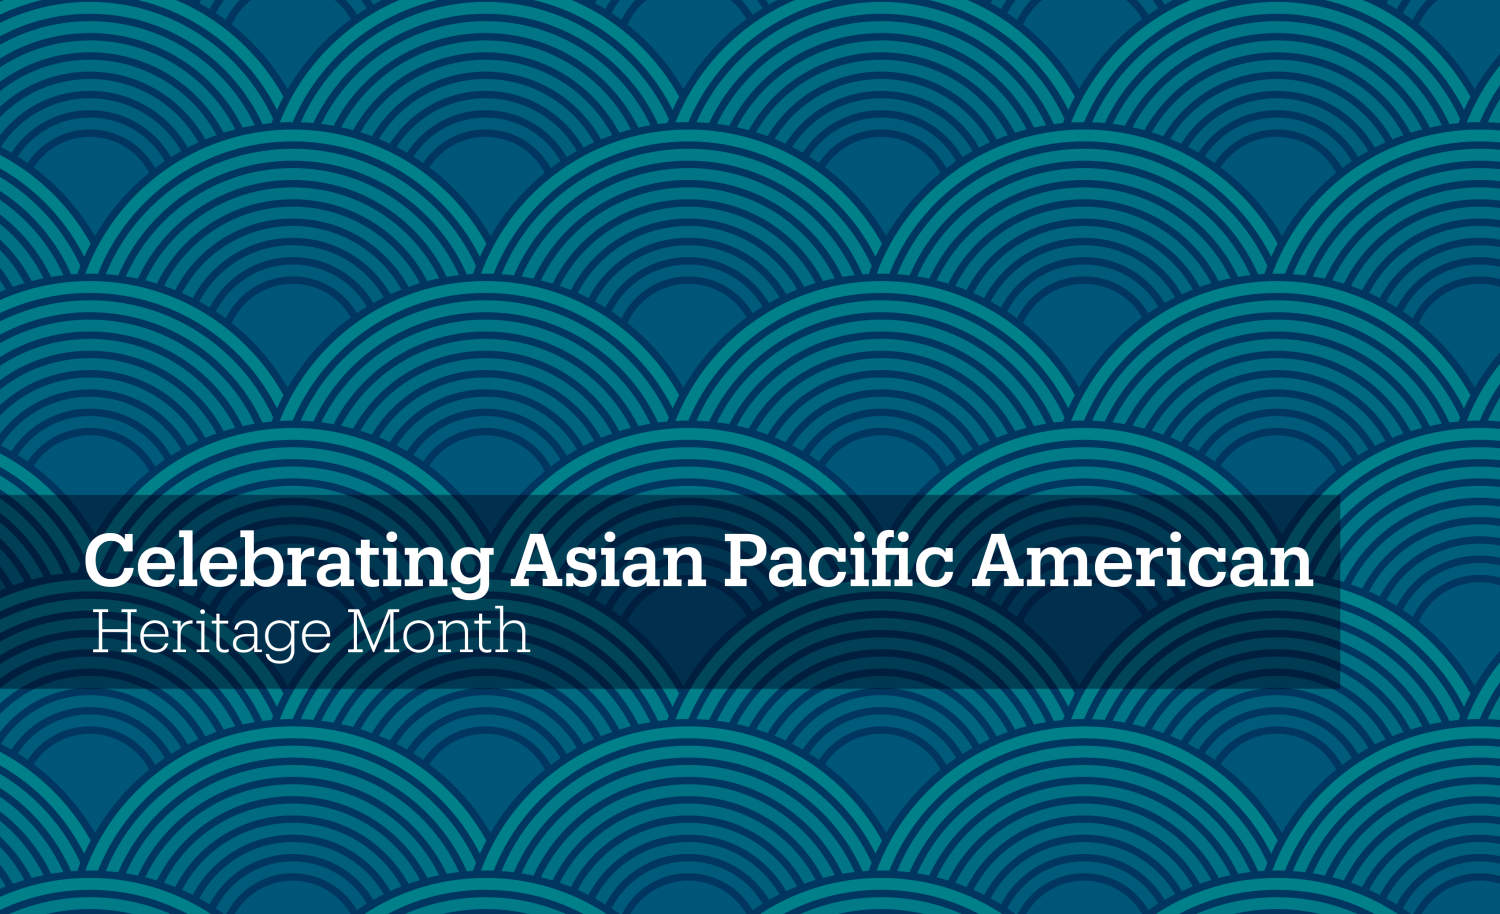 The College of Engineering celebrates some remarkable scientists and engineers with Asian American and Pacific Islander heritage.